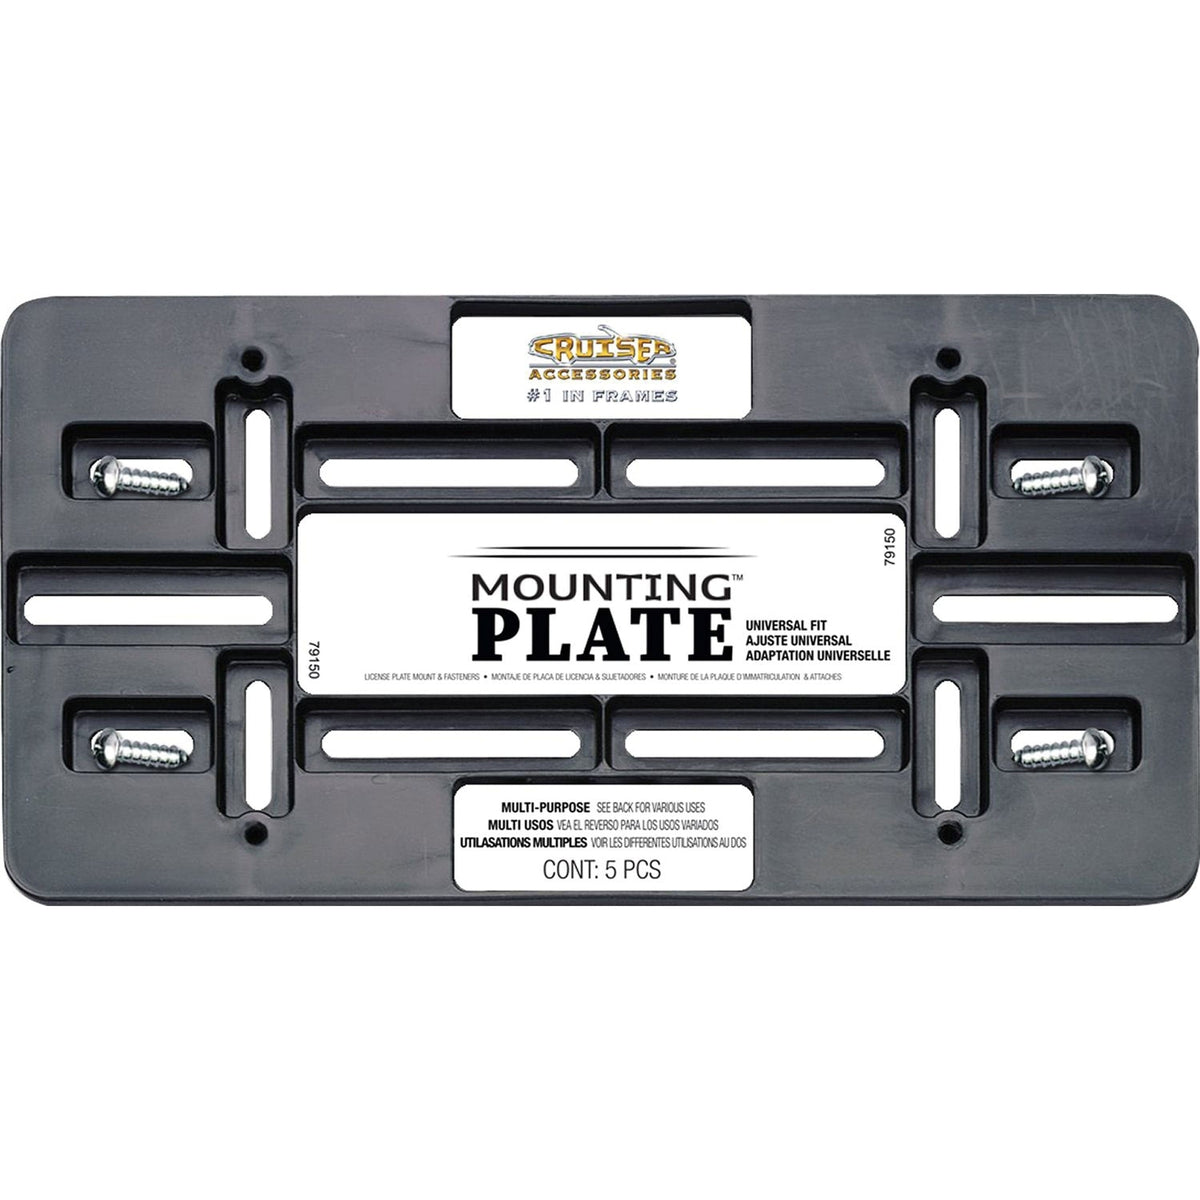 Cruiser Accessories Qualifies for Free Shipping Cruiser License Plate Mounting Plate Black Plastic #79150